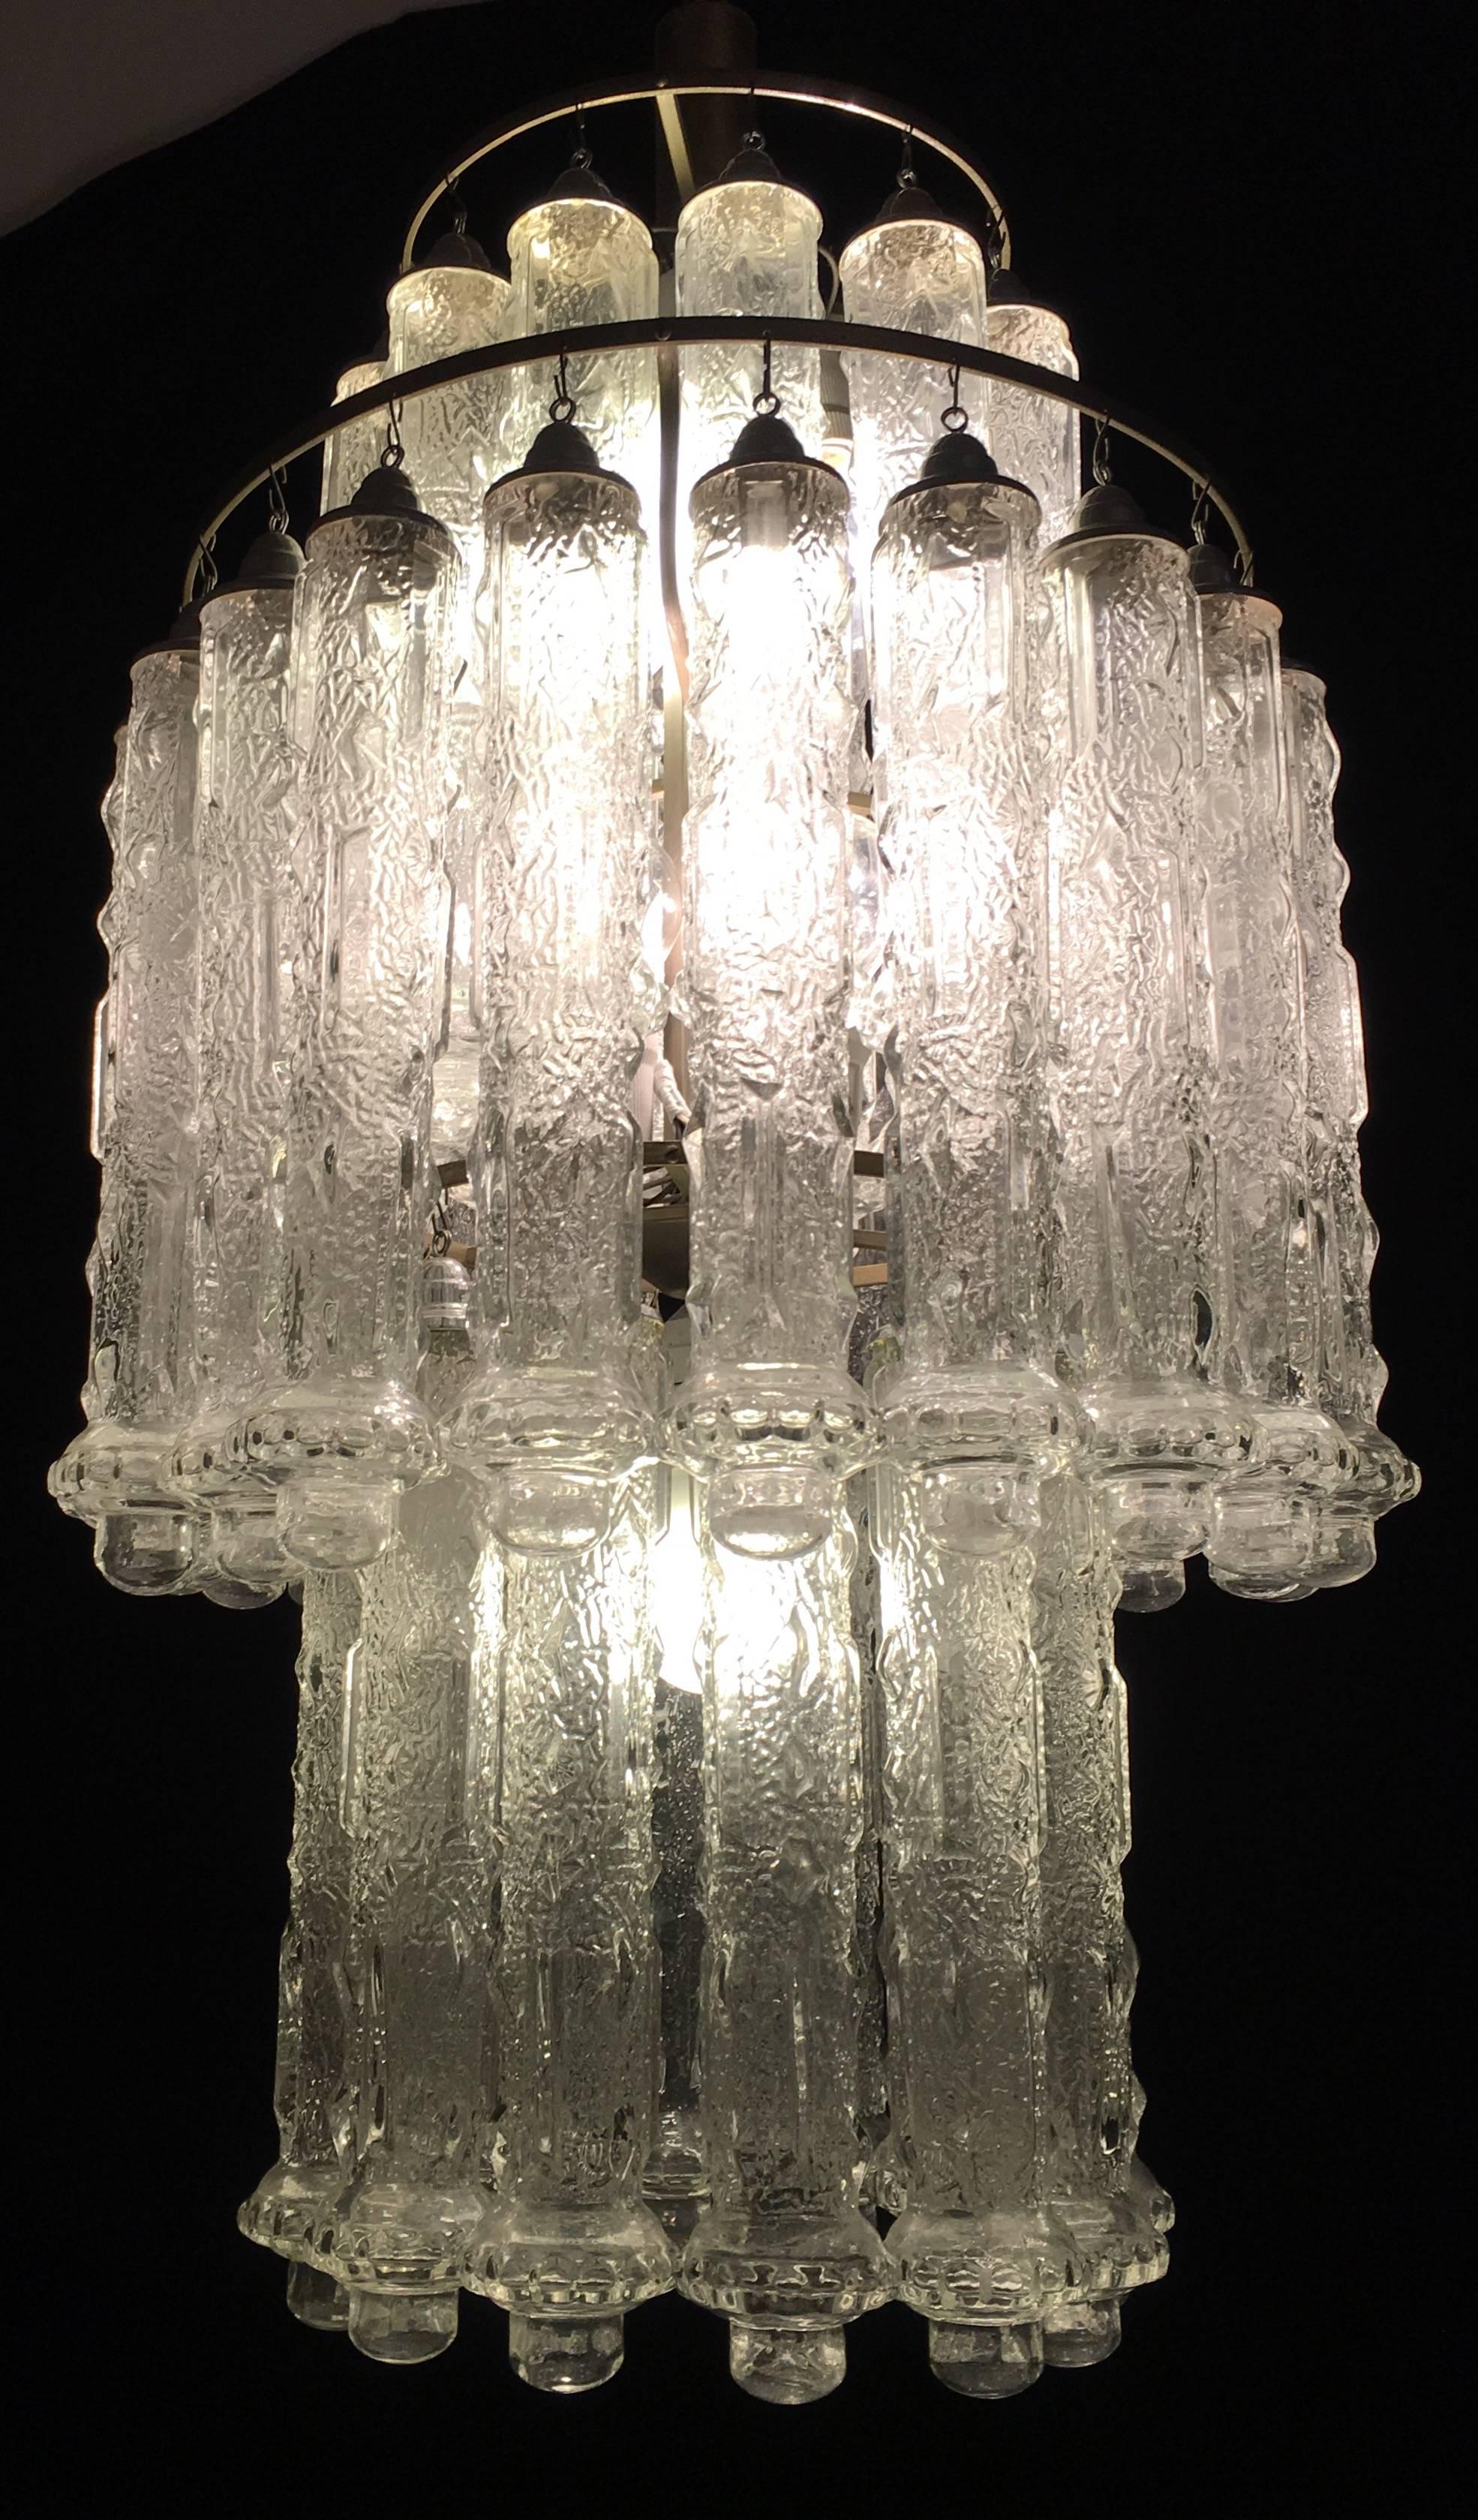 Vintage chandelier made by 48 fantastic Murano glass hourglass.

Height without chain 100cm.